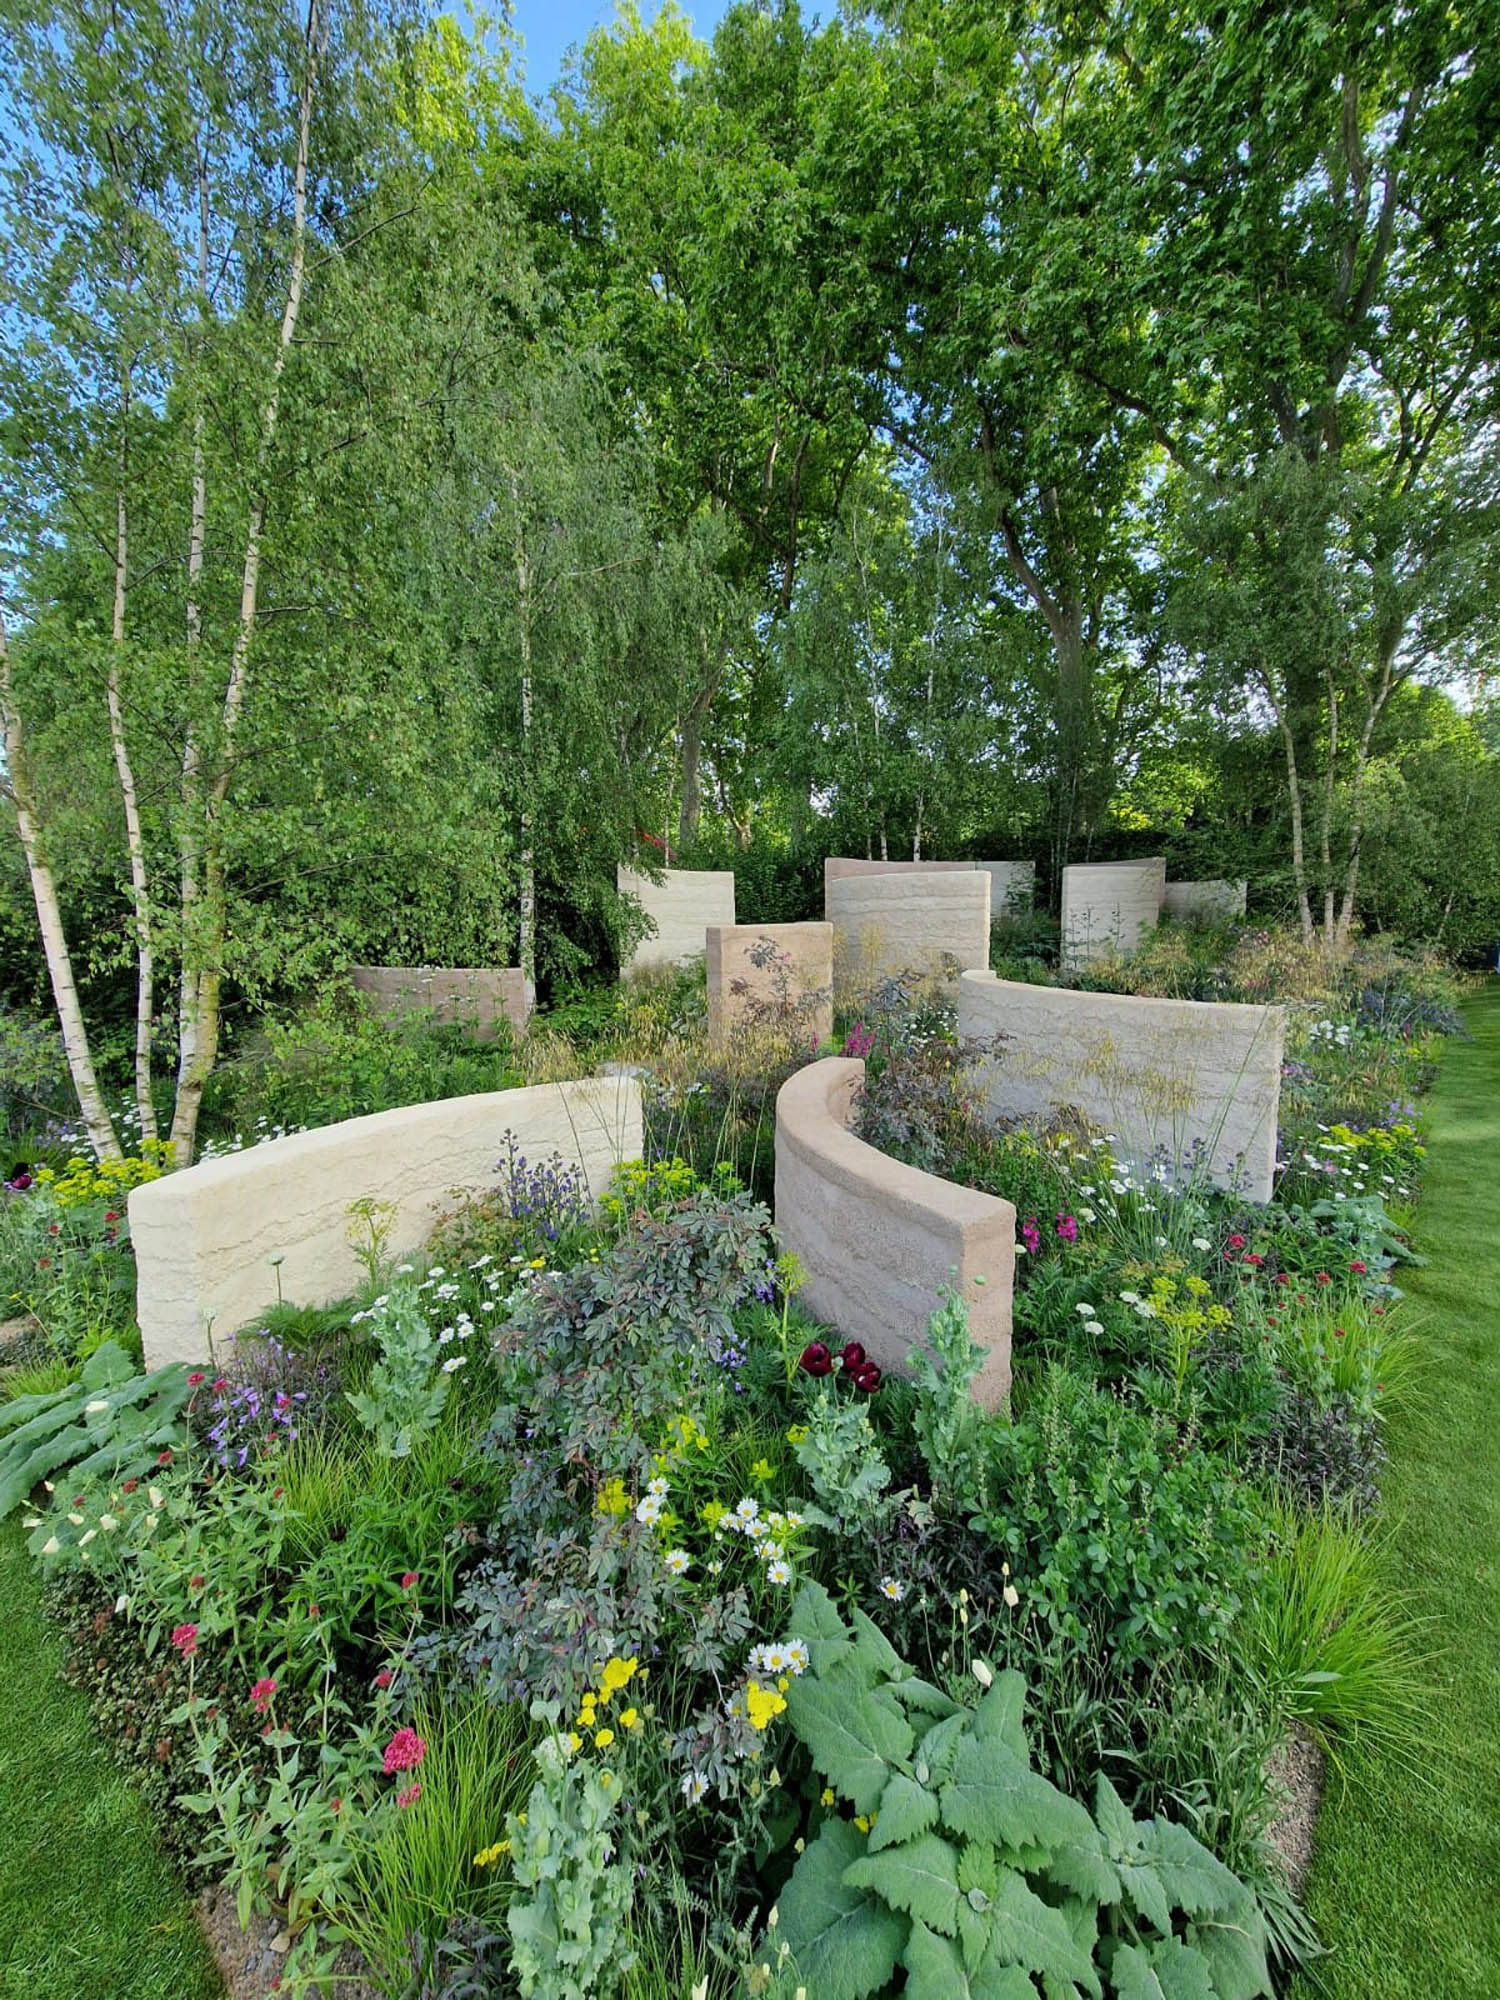 Curved stone walls silver birch trees and wildflowers create a calm and serene atmosphere in the Mind charity garden for mental health at Chelsea 2022